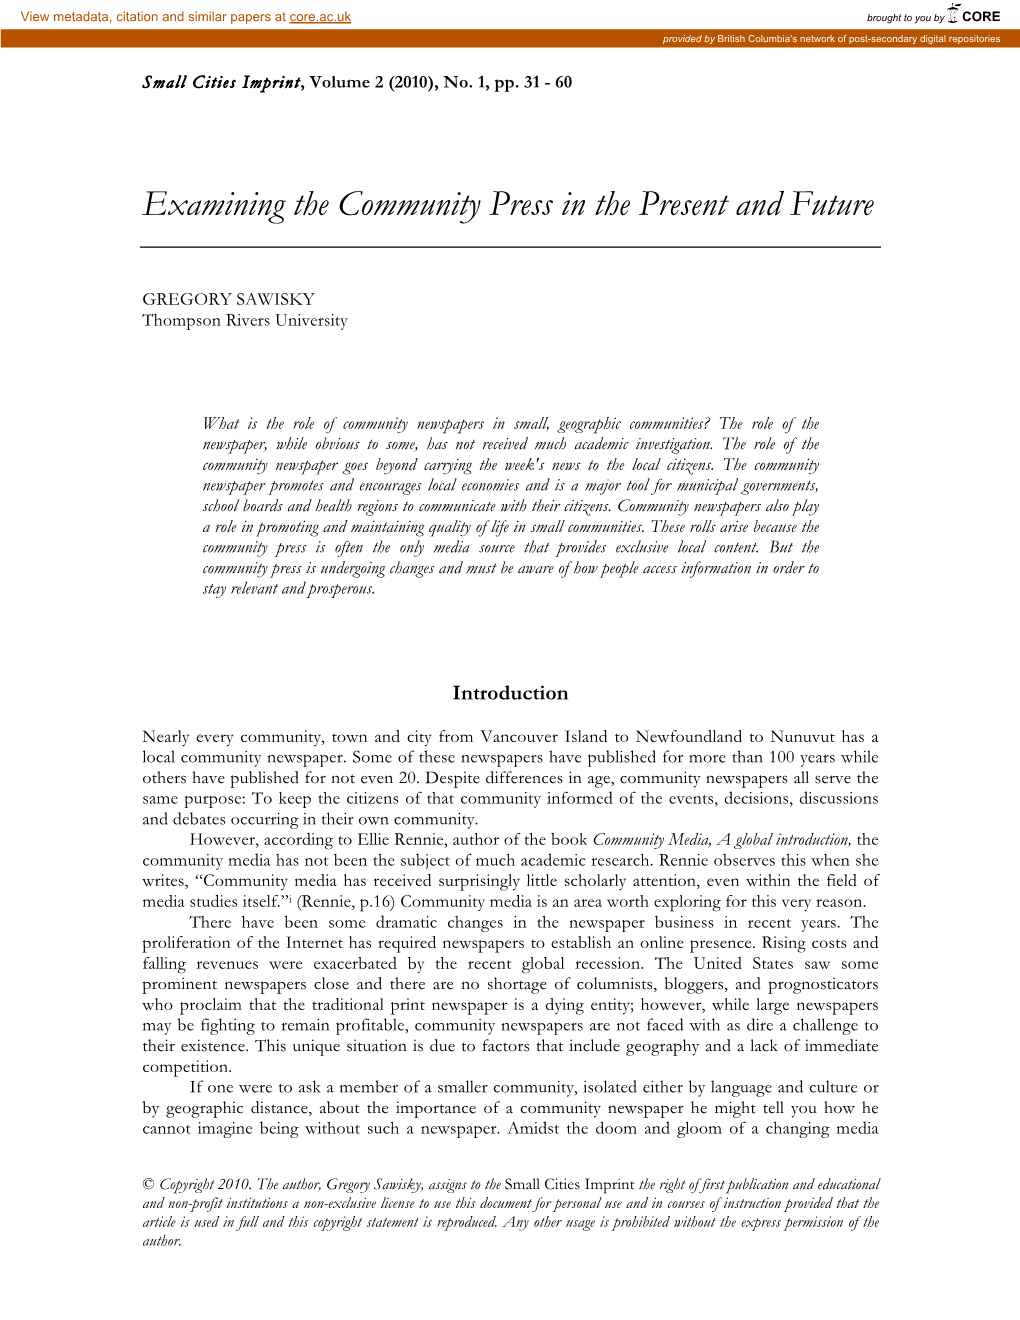 Examining the Community Press in the Present and Future